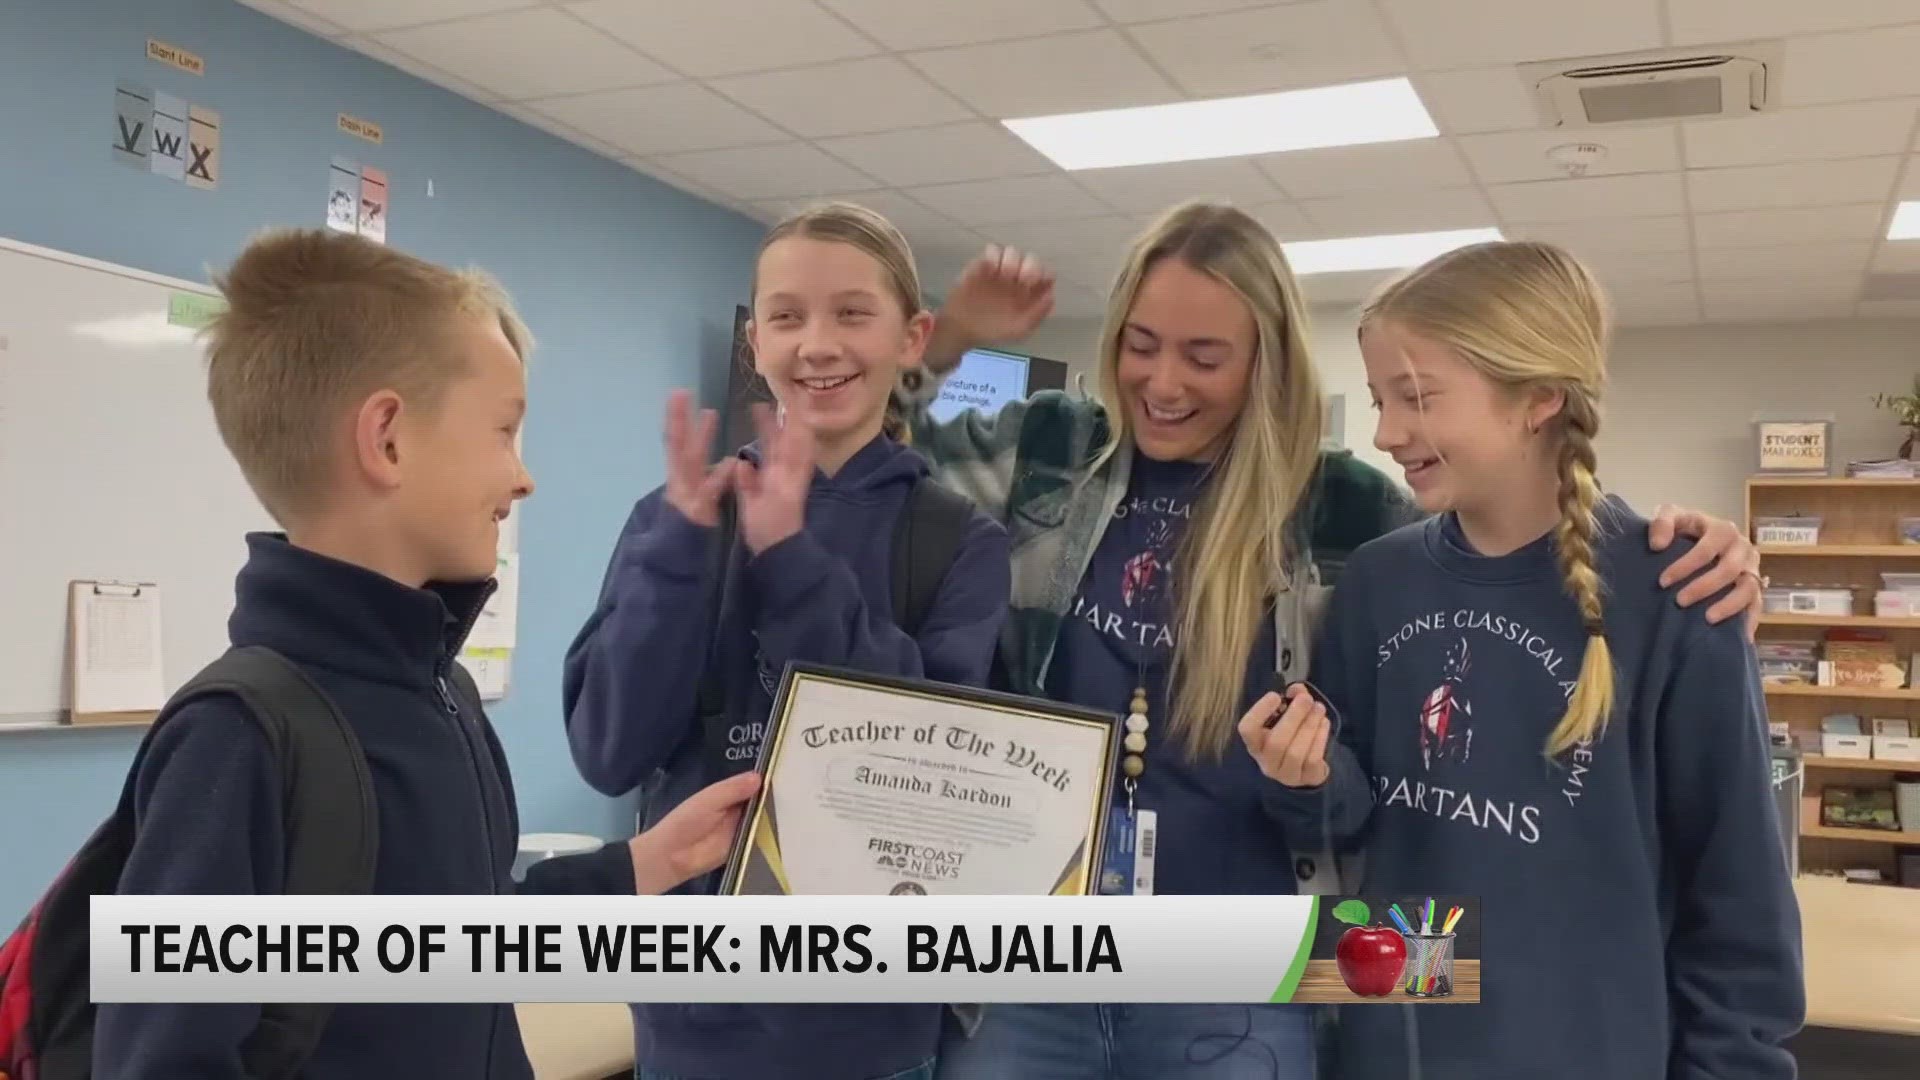 Mrs. Bajalia is described as "nice," "kind," and "a great second grade teacher" by students at Cornerstone Classical Academy in Jacksonville.